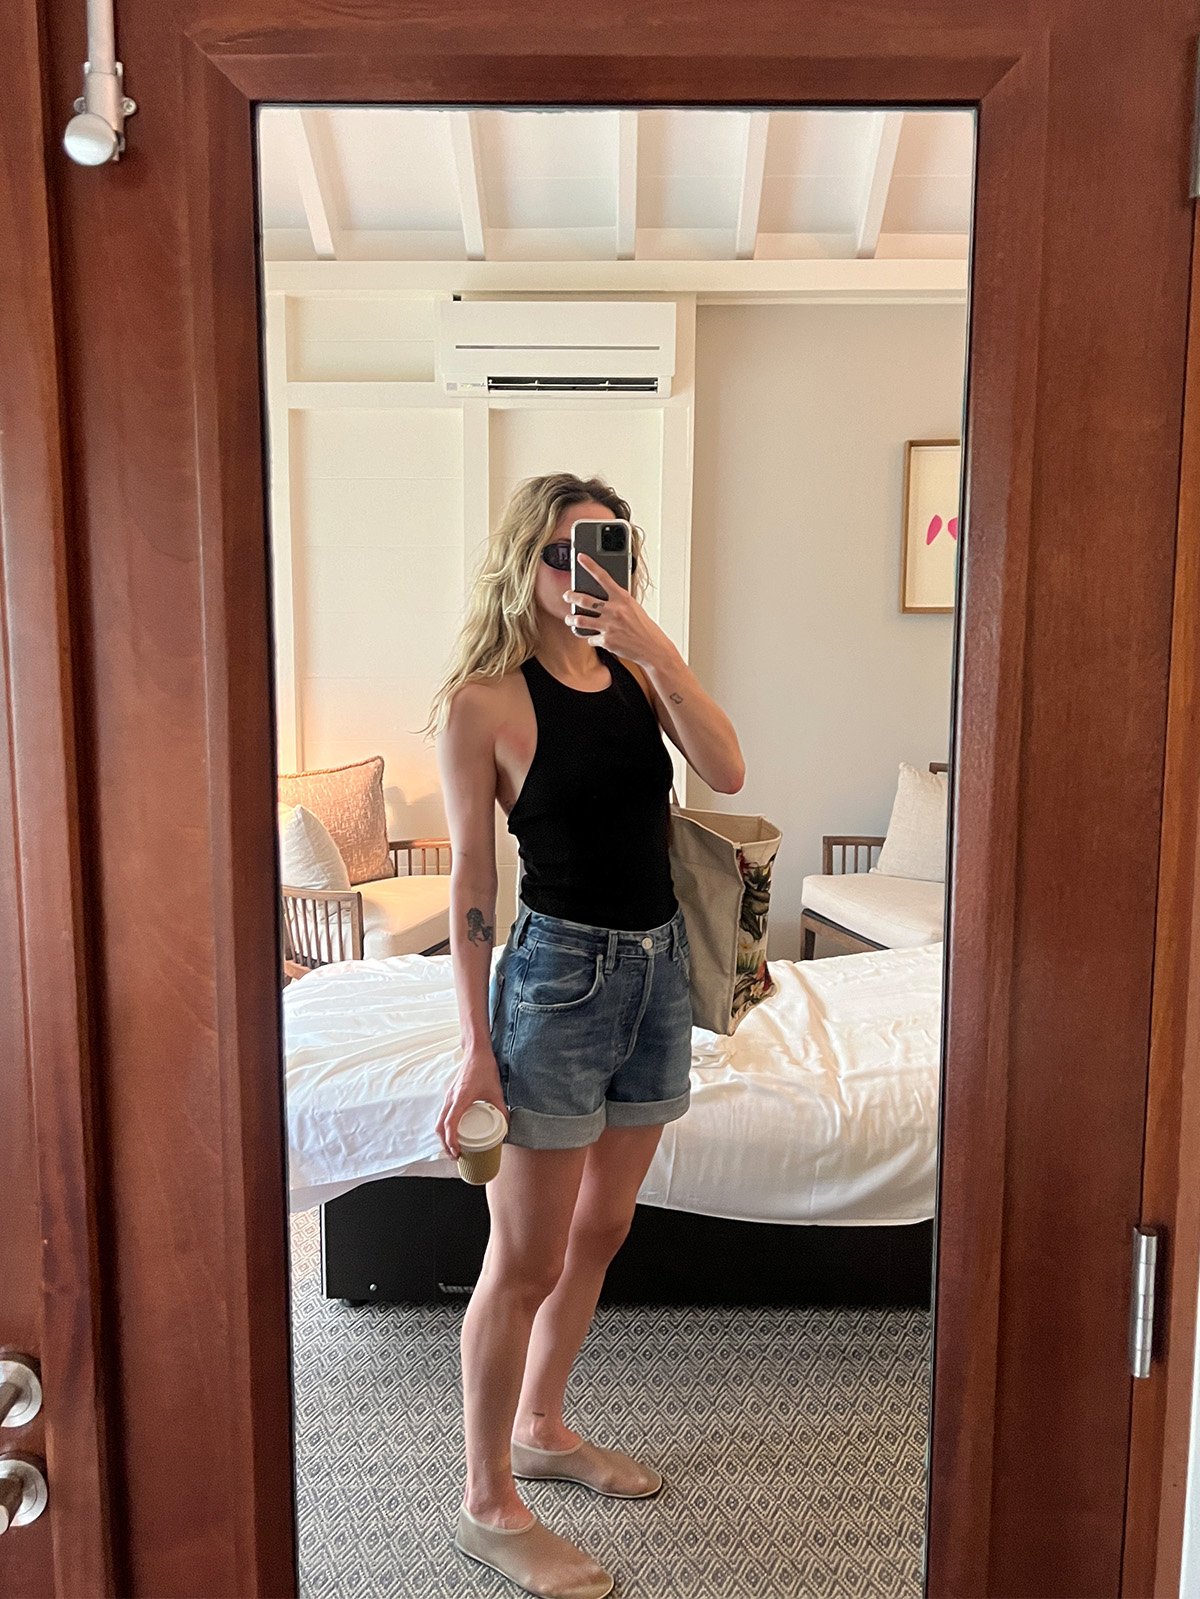 Eliza Huber wearing a black halter top, jean shorts, and The Row mesh flats.